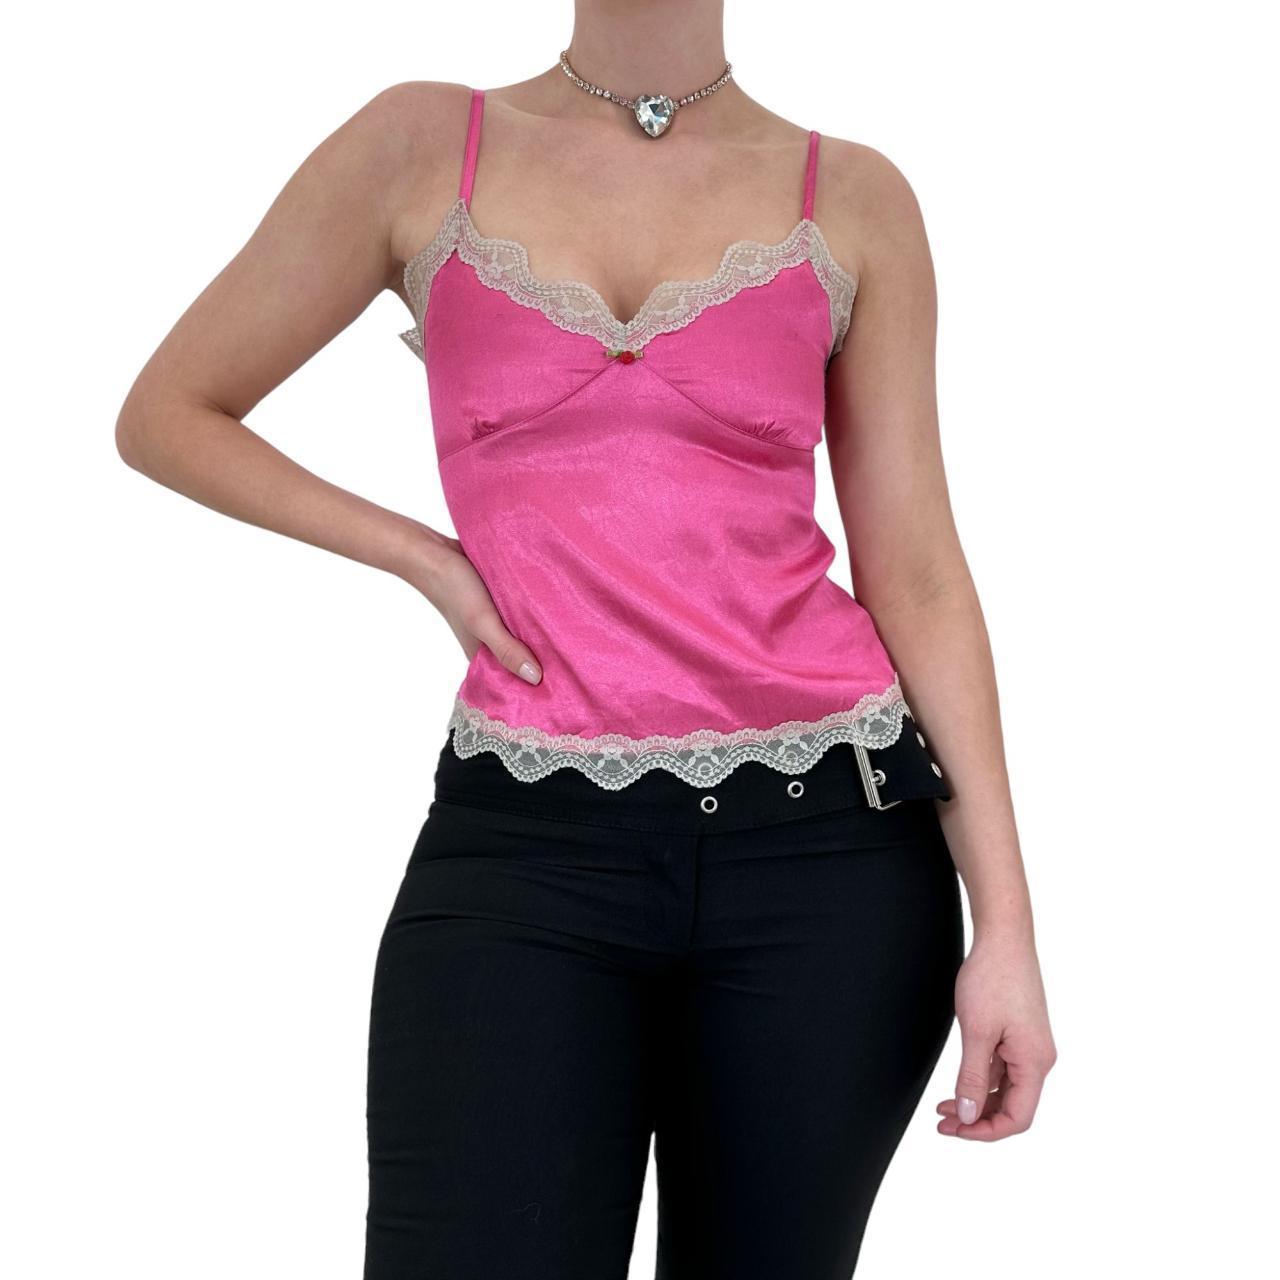 Women's Lace Trim Satin Cami Top in Hot Pink